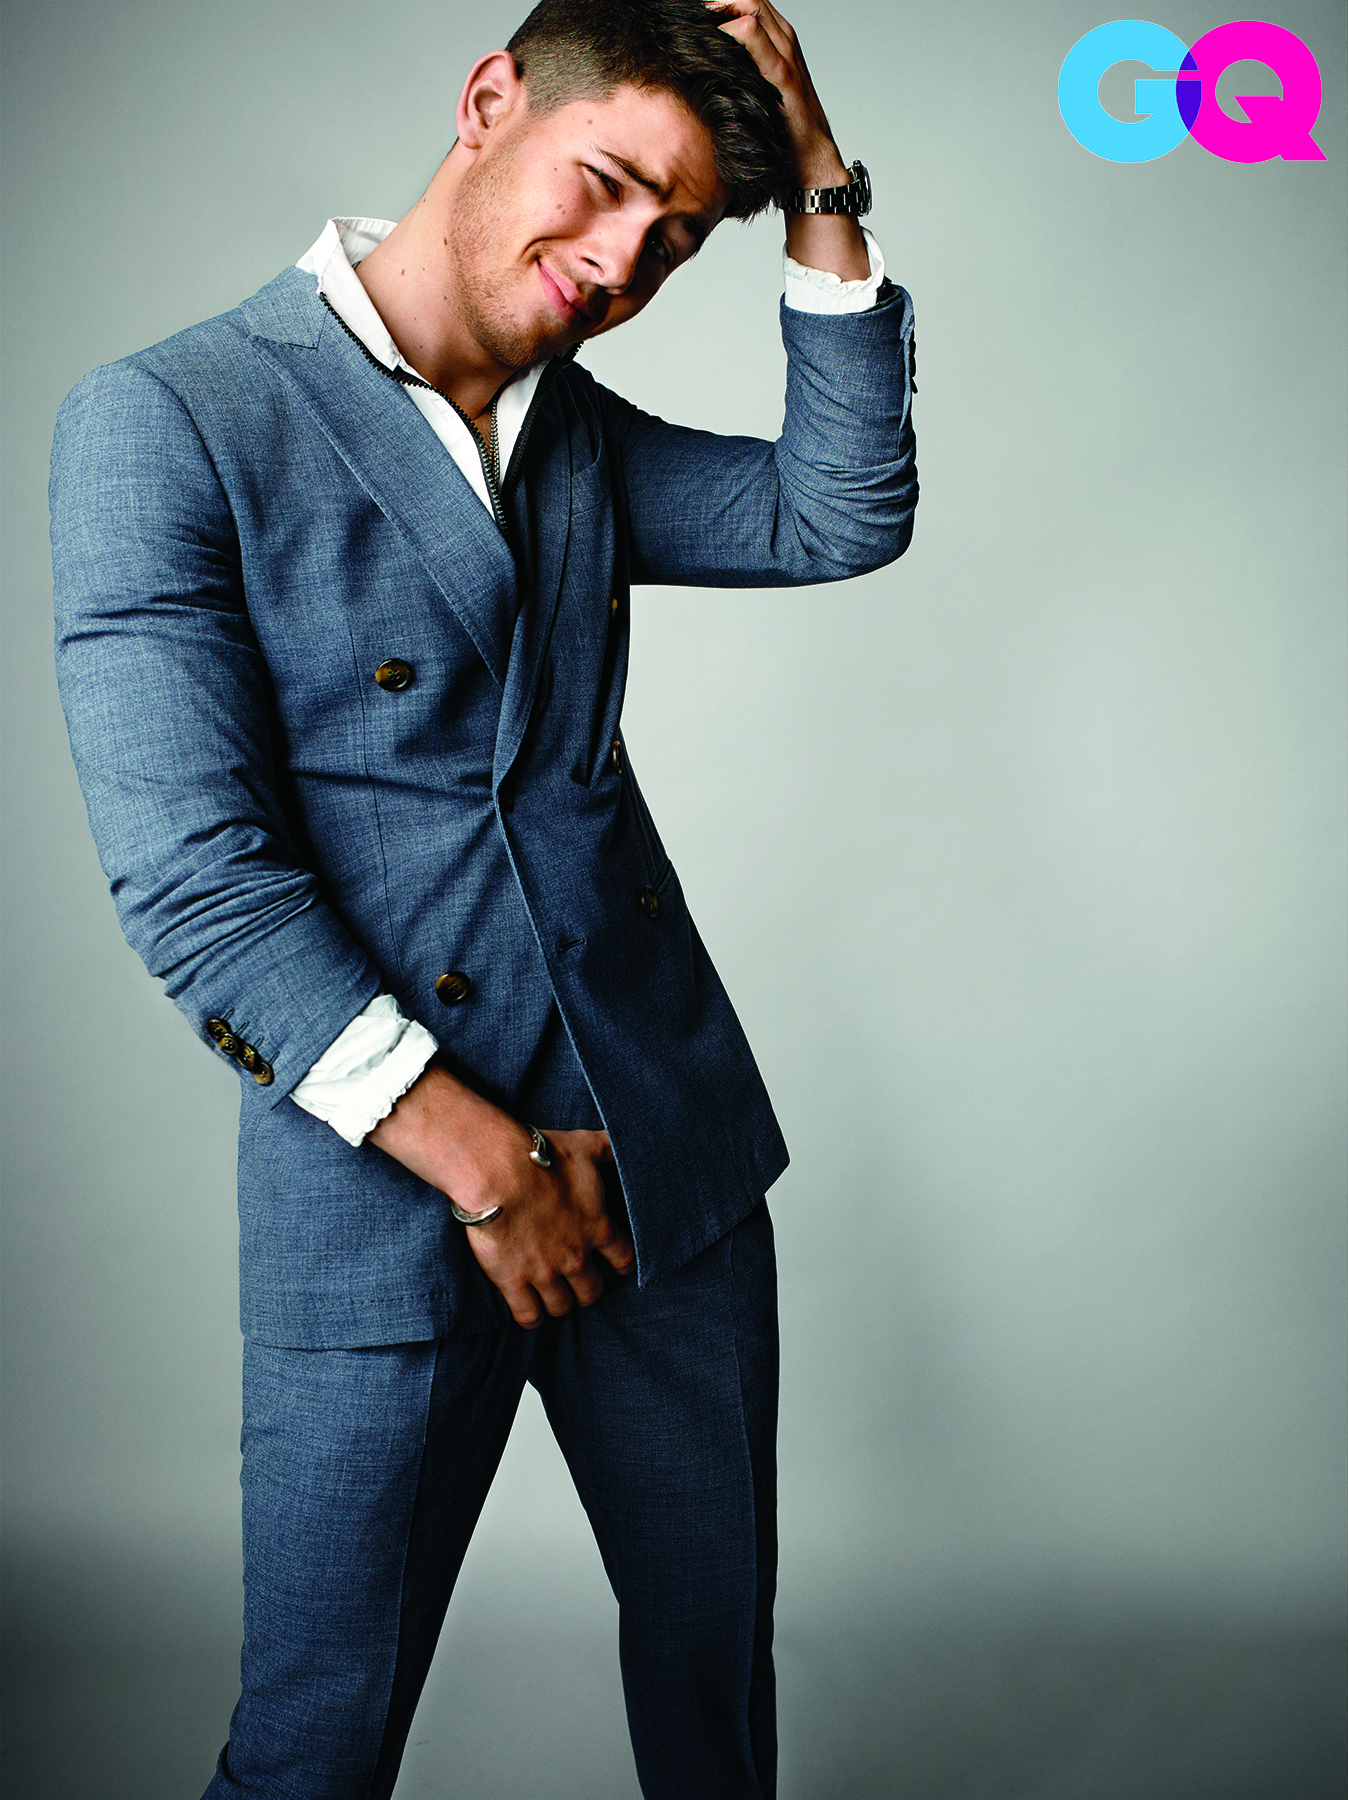 Nick Jonas Rocks Double-Breasted Suits for GQ February 2015 Photo Shoot